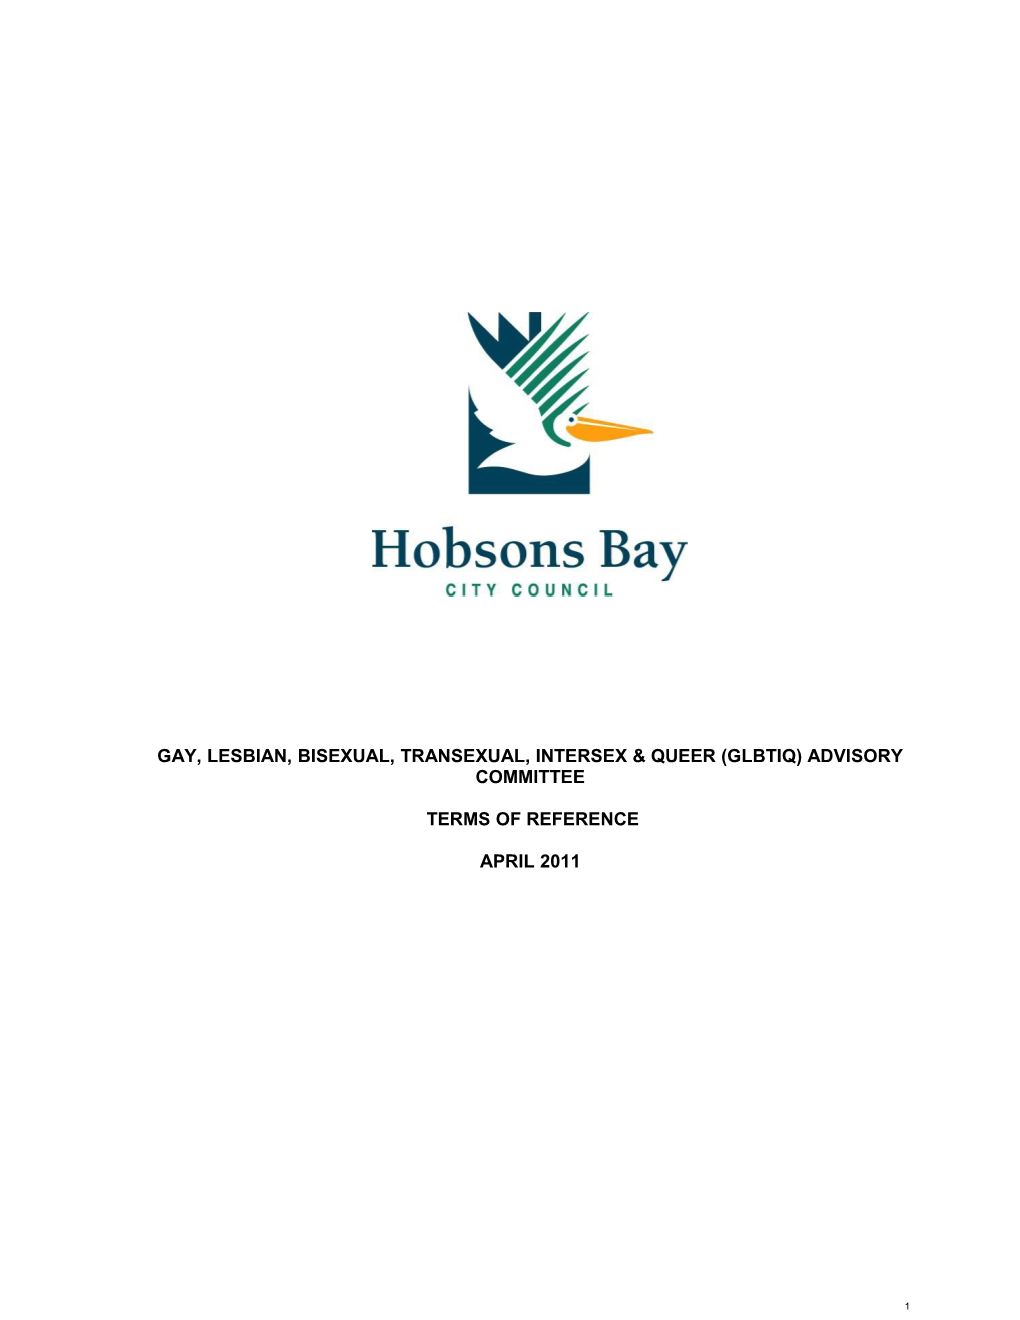 Hobsons Bay Multicultural Advisory Group